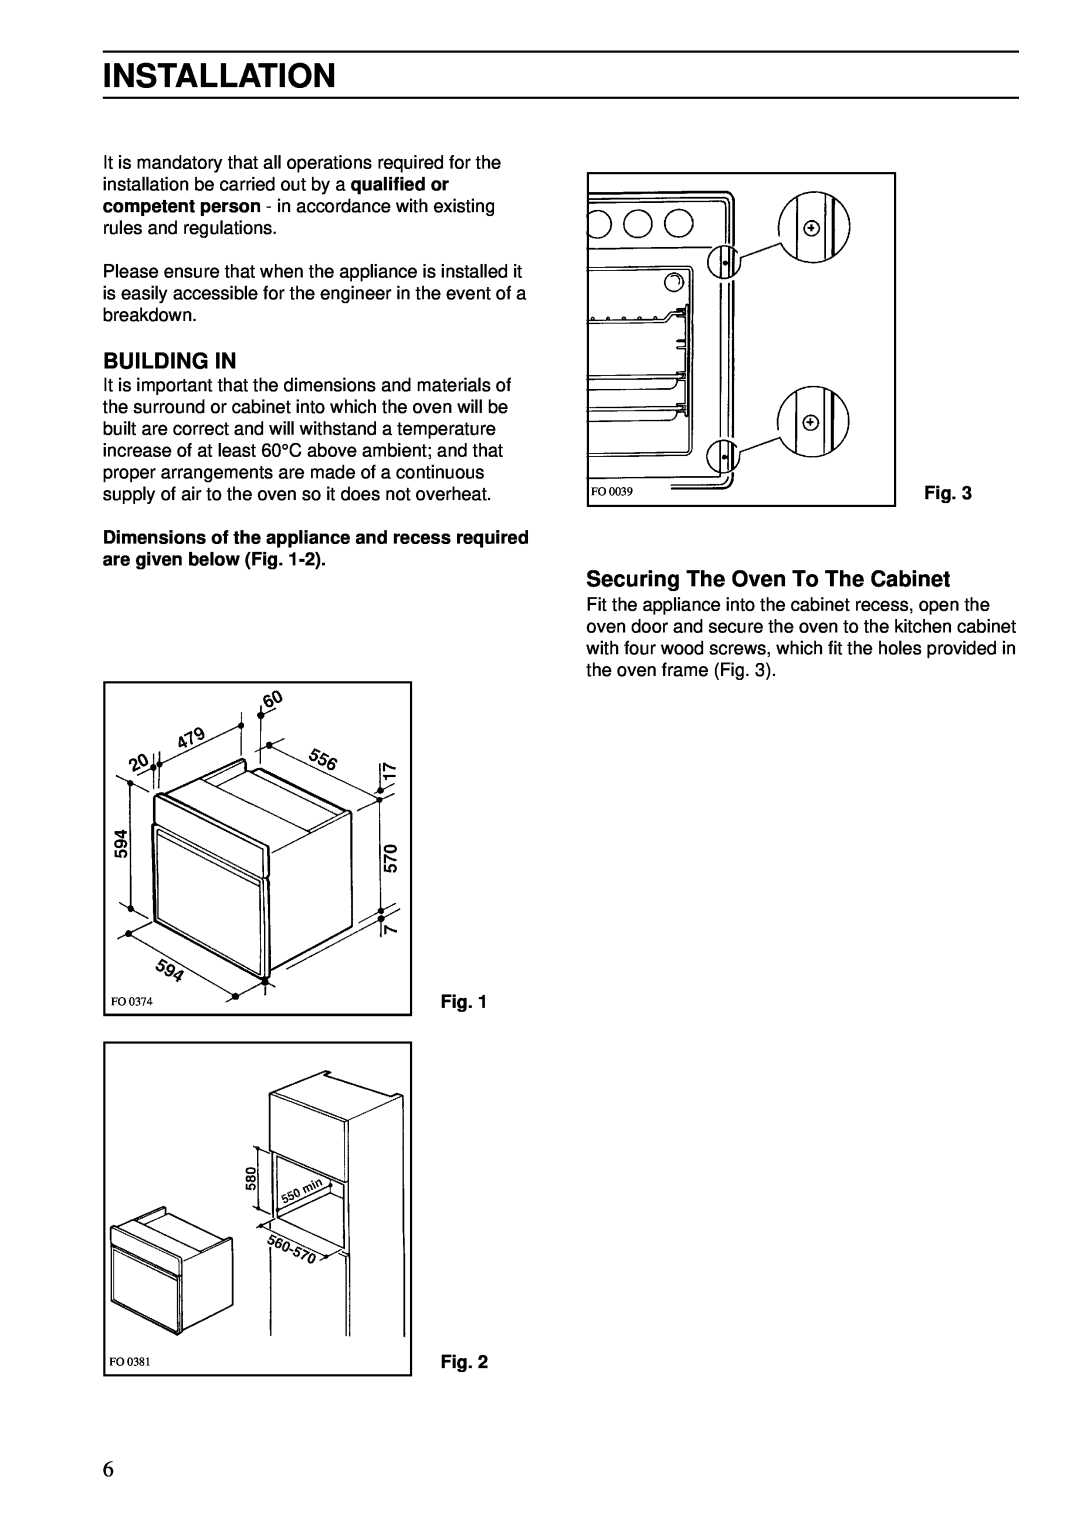 Zanussi ZSA 25 installation manual Installation, Building In, Securing The Oven To The Cabinet 